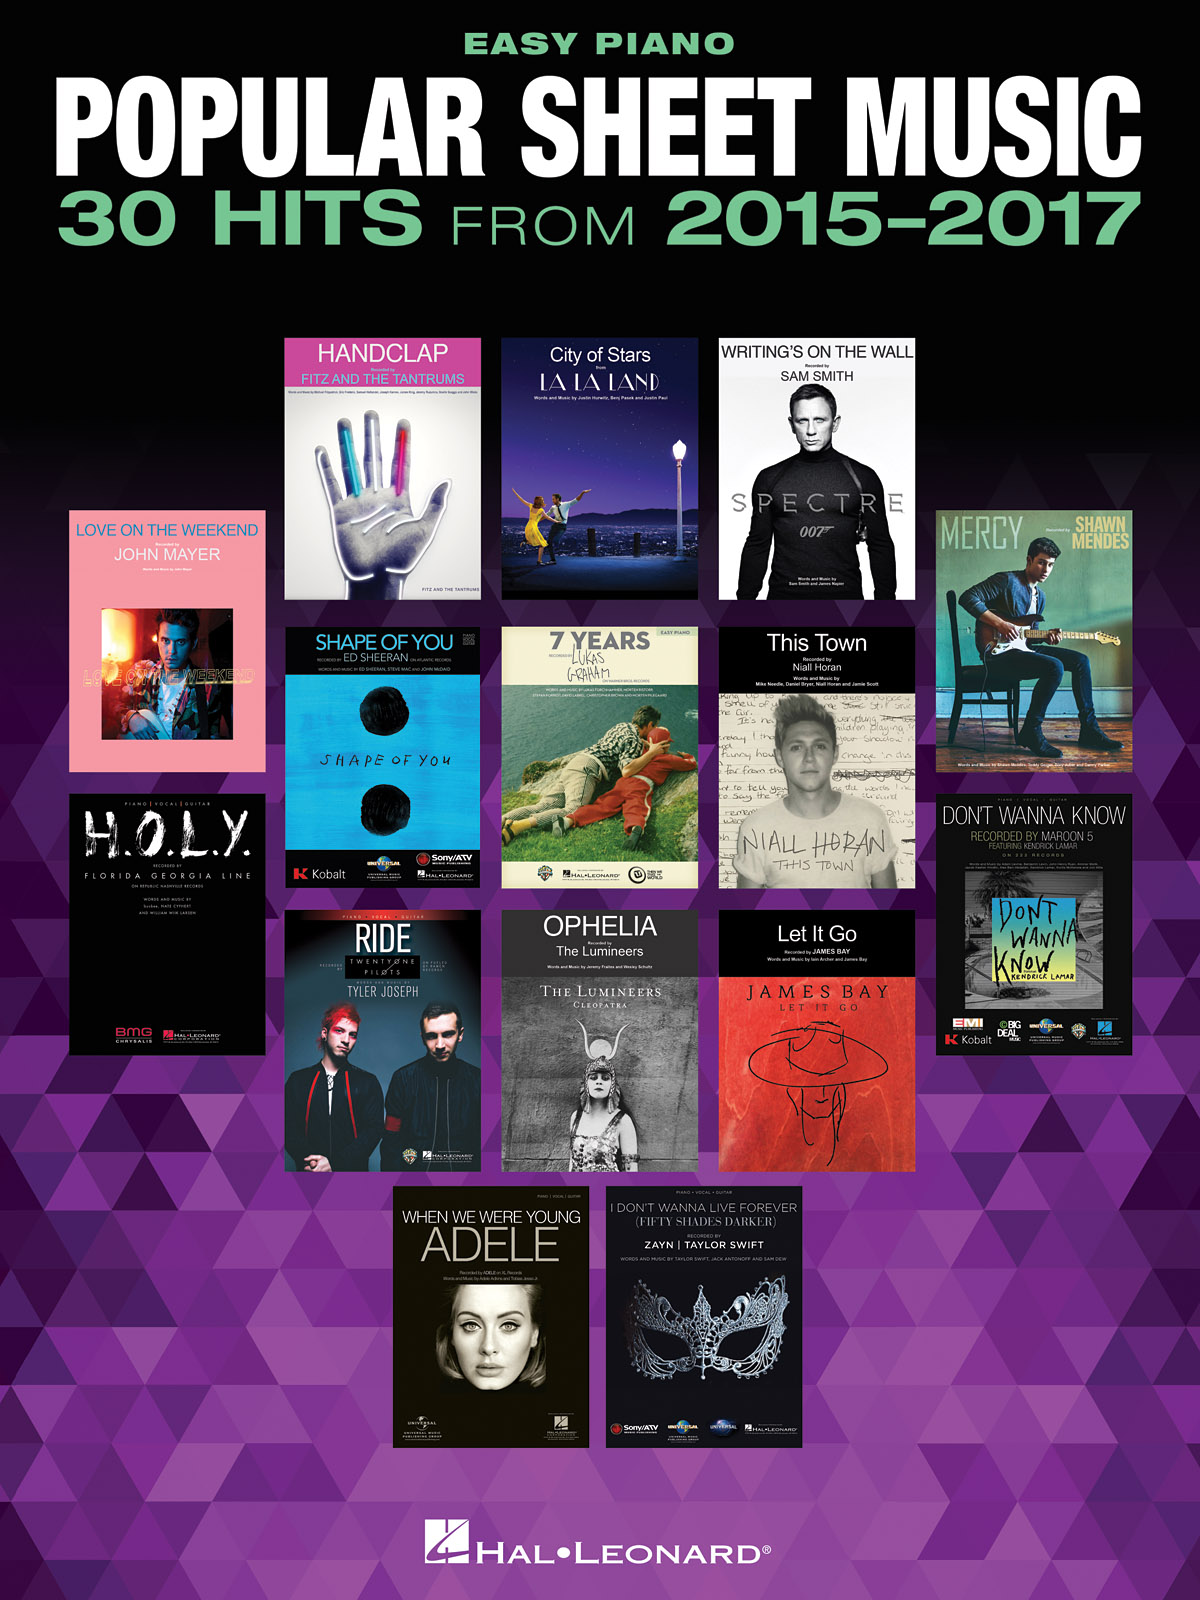 Popular Sheet Music - 30 Hits From 2015-2017